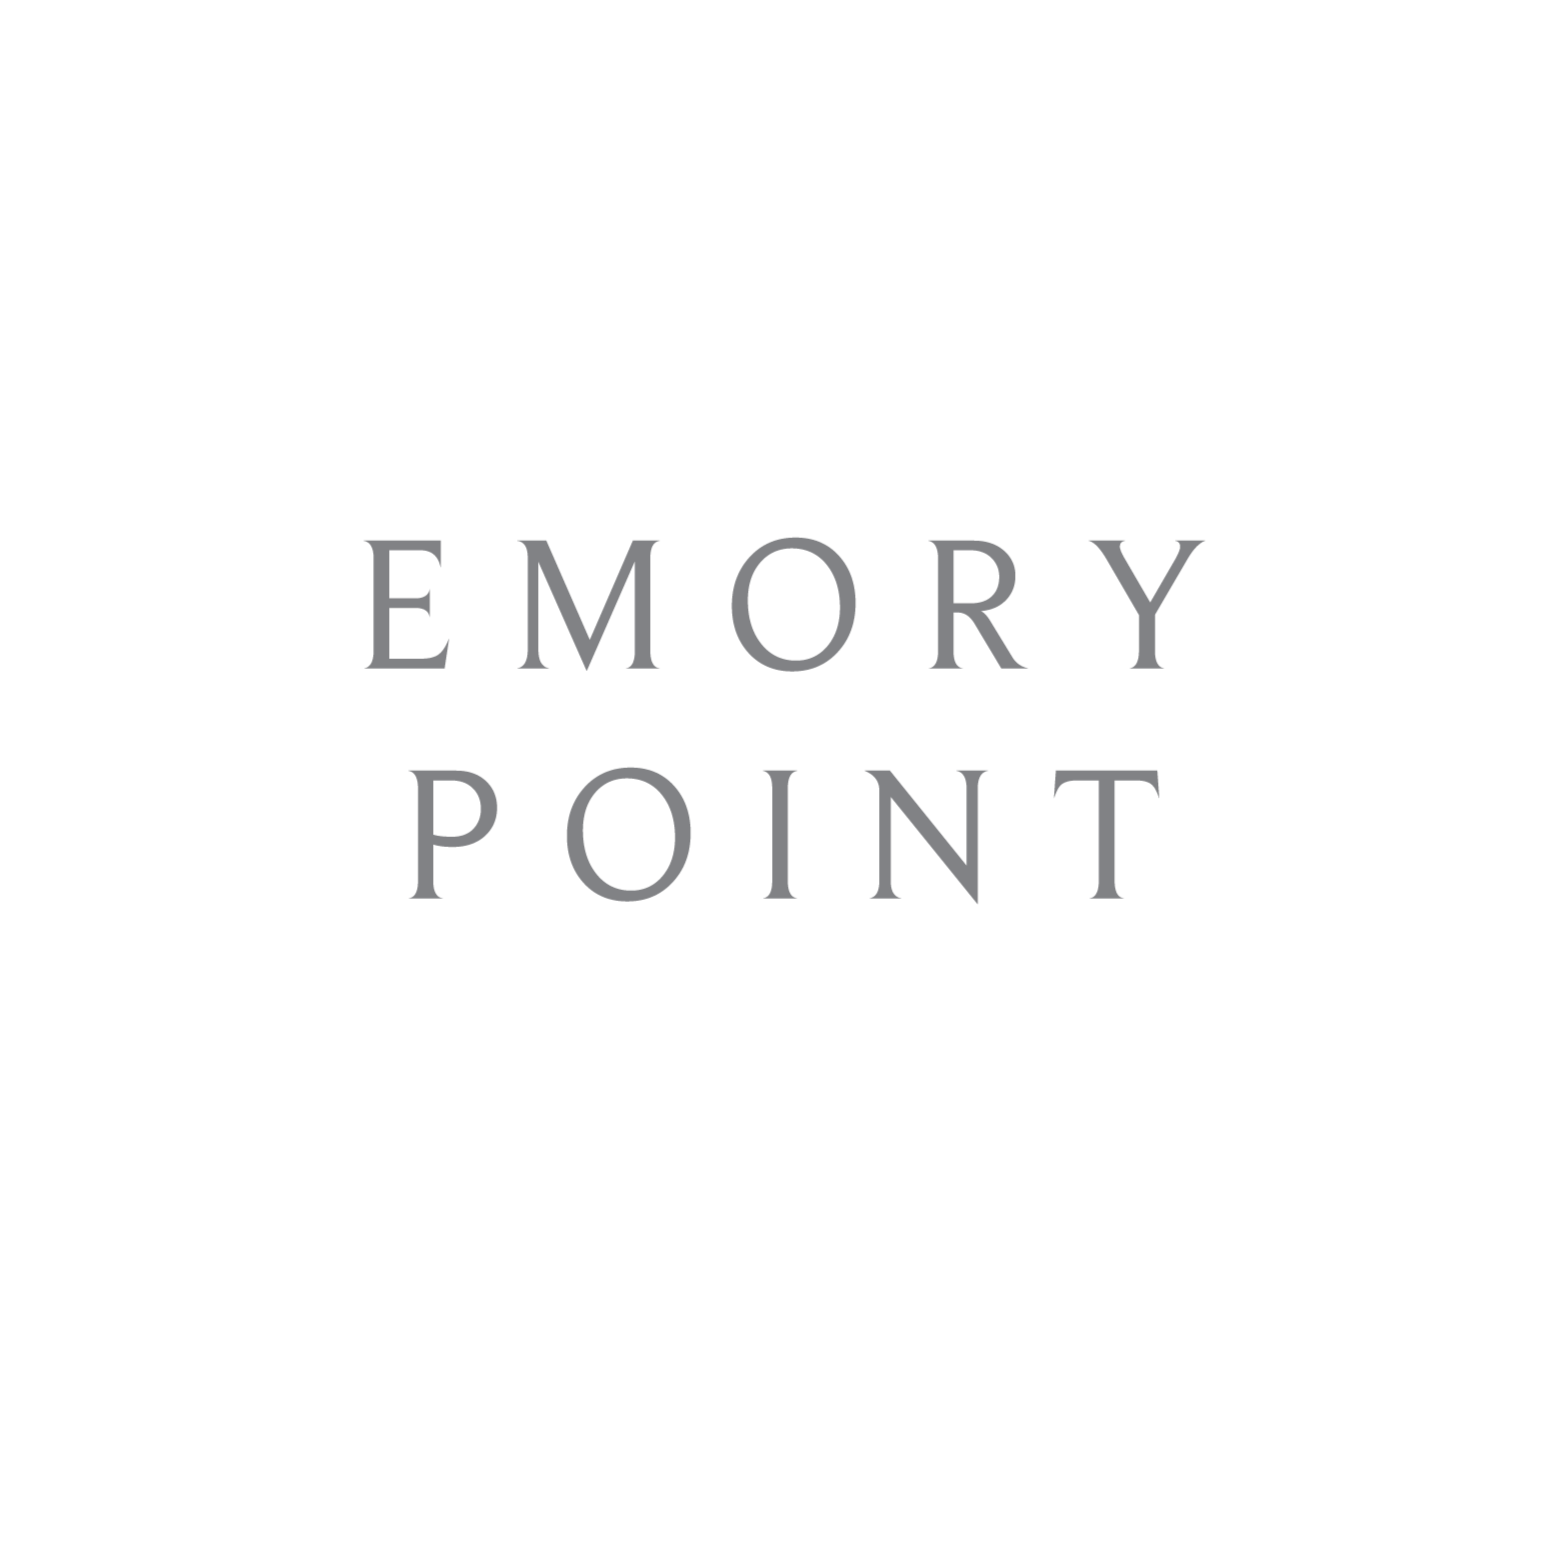 Emory Point